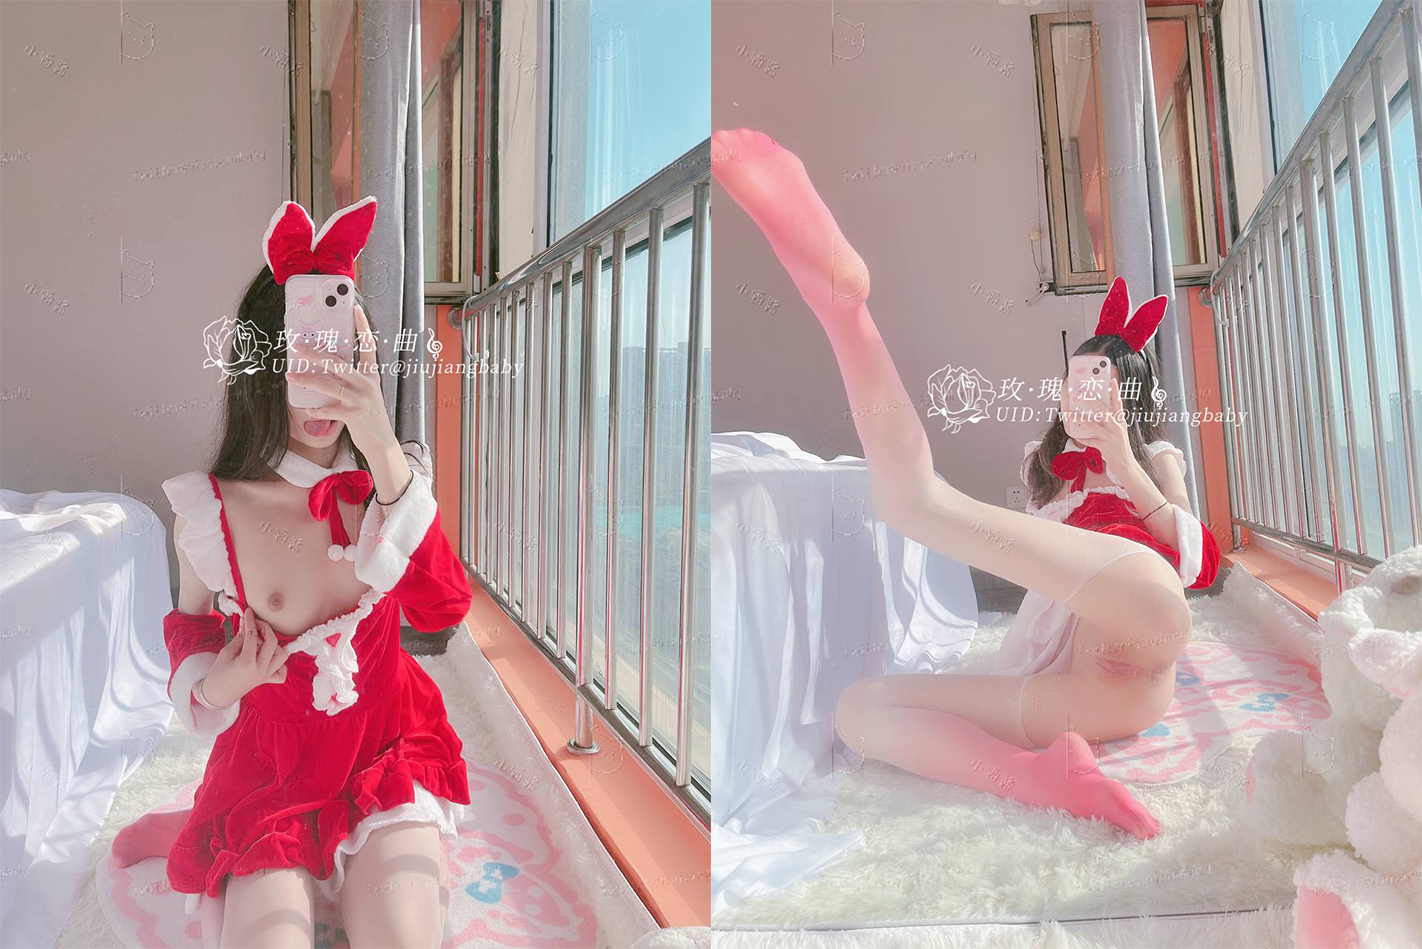 The Christmas special of "Siu Siu Sauce" with 270,000 Twitter followers is about pink pussy and passionate inner shots.